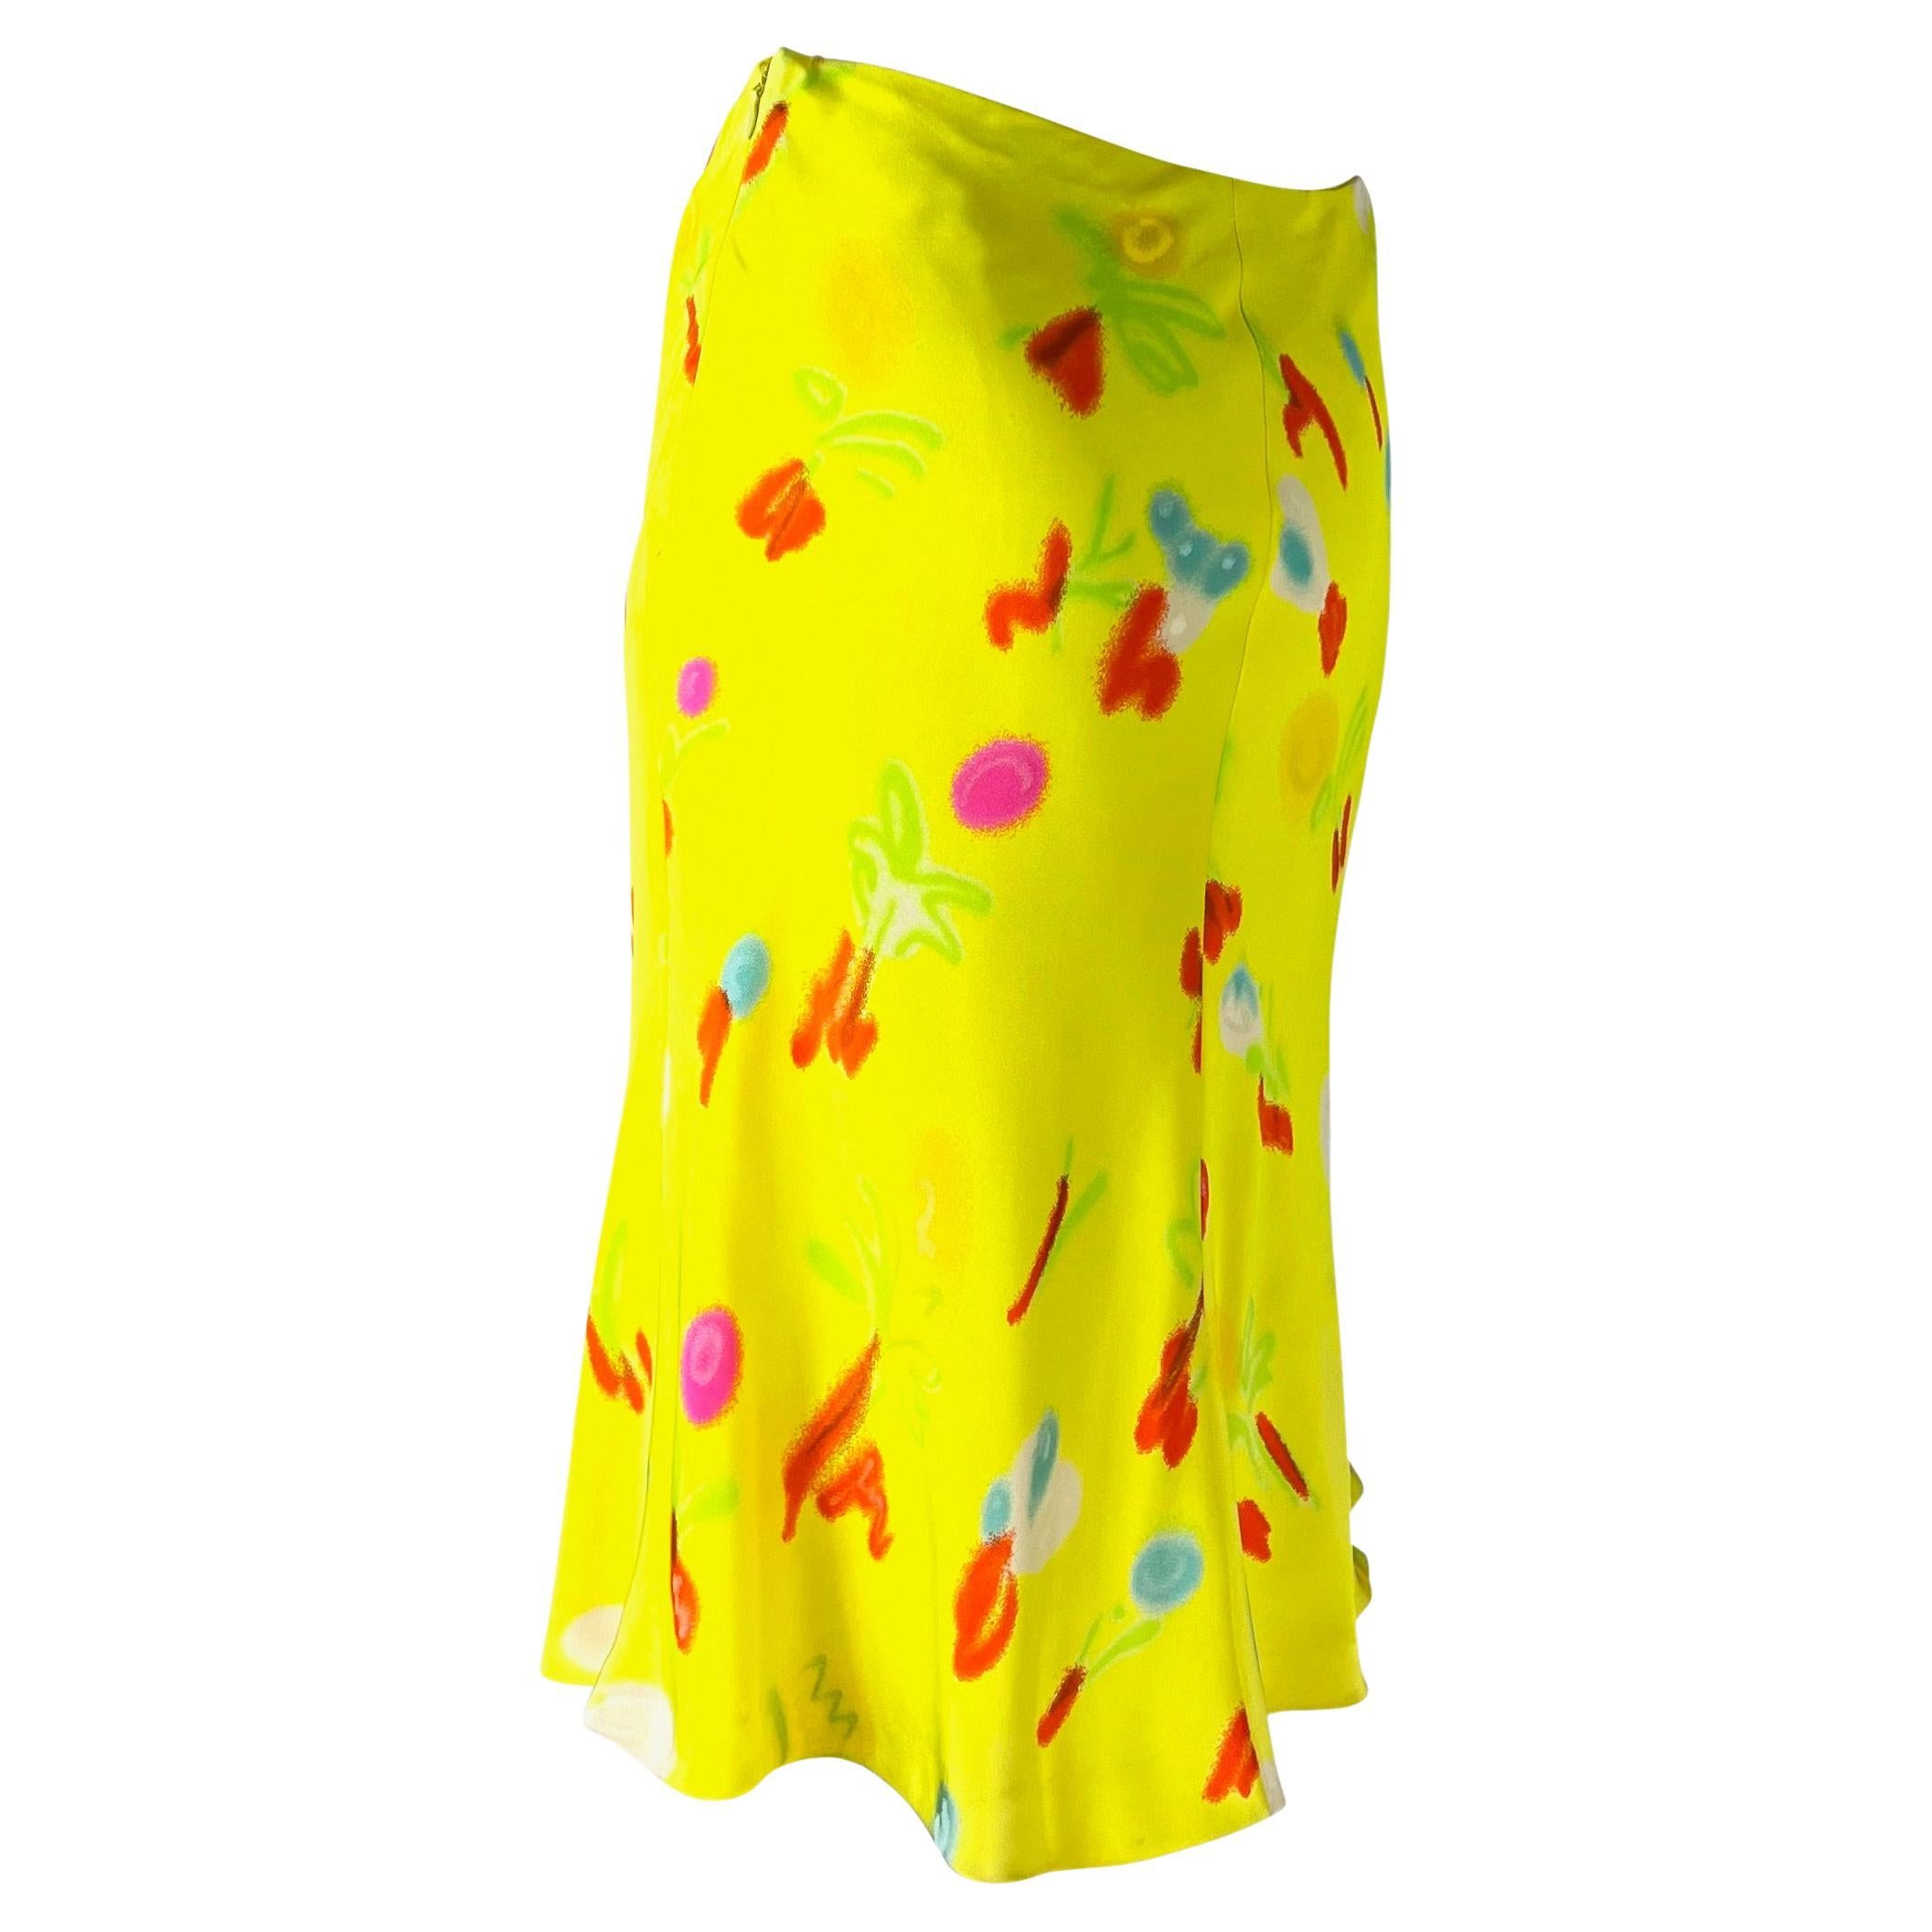 Women's NWT S/S 1996 Gianni Versace Couture Neon Yellow Graffiti Floral Print Skirt For Sale